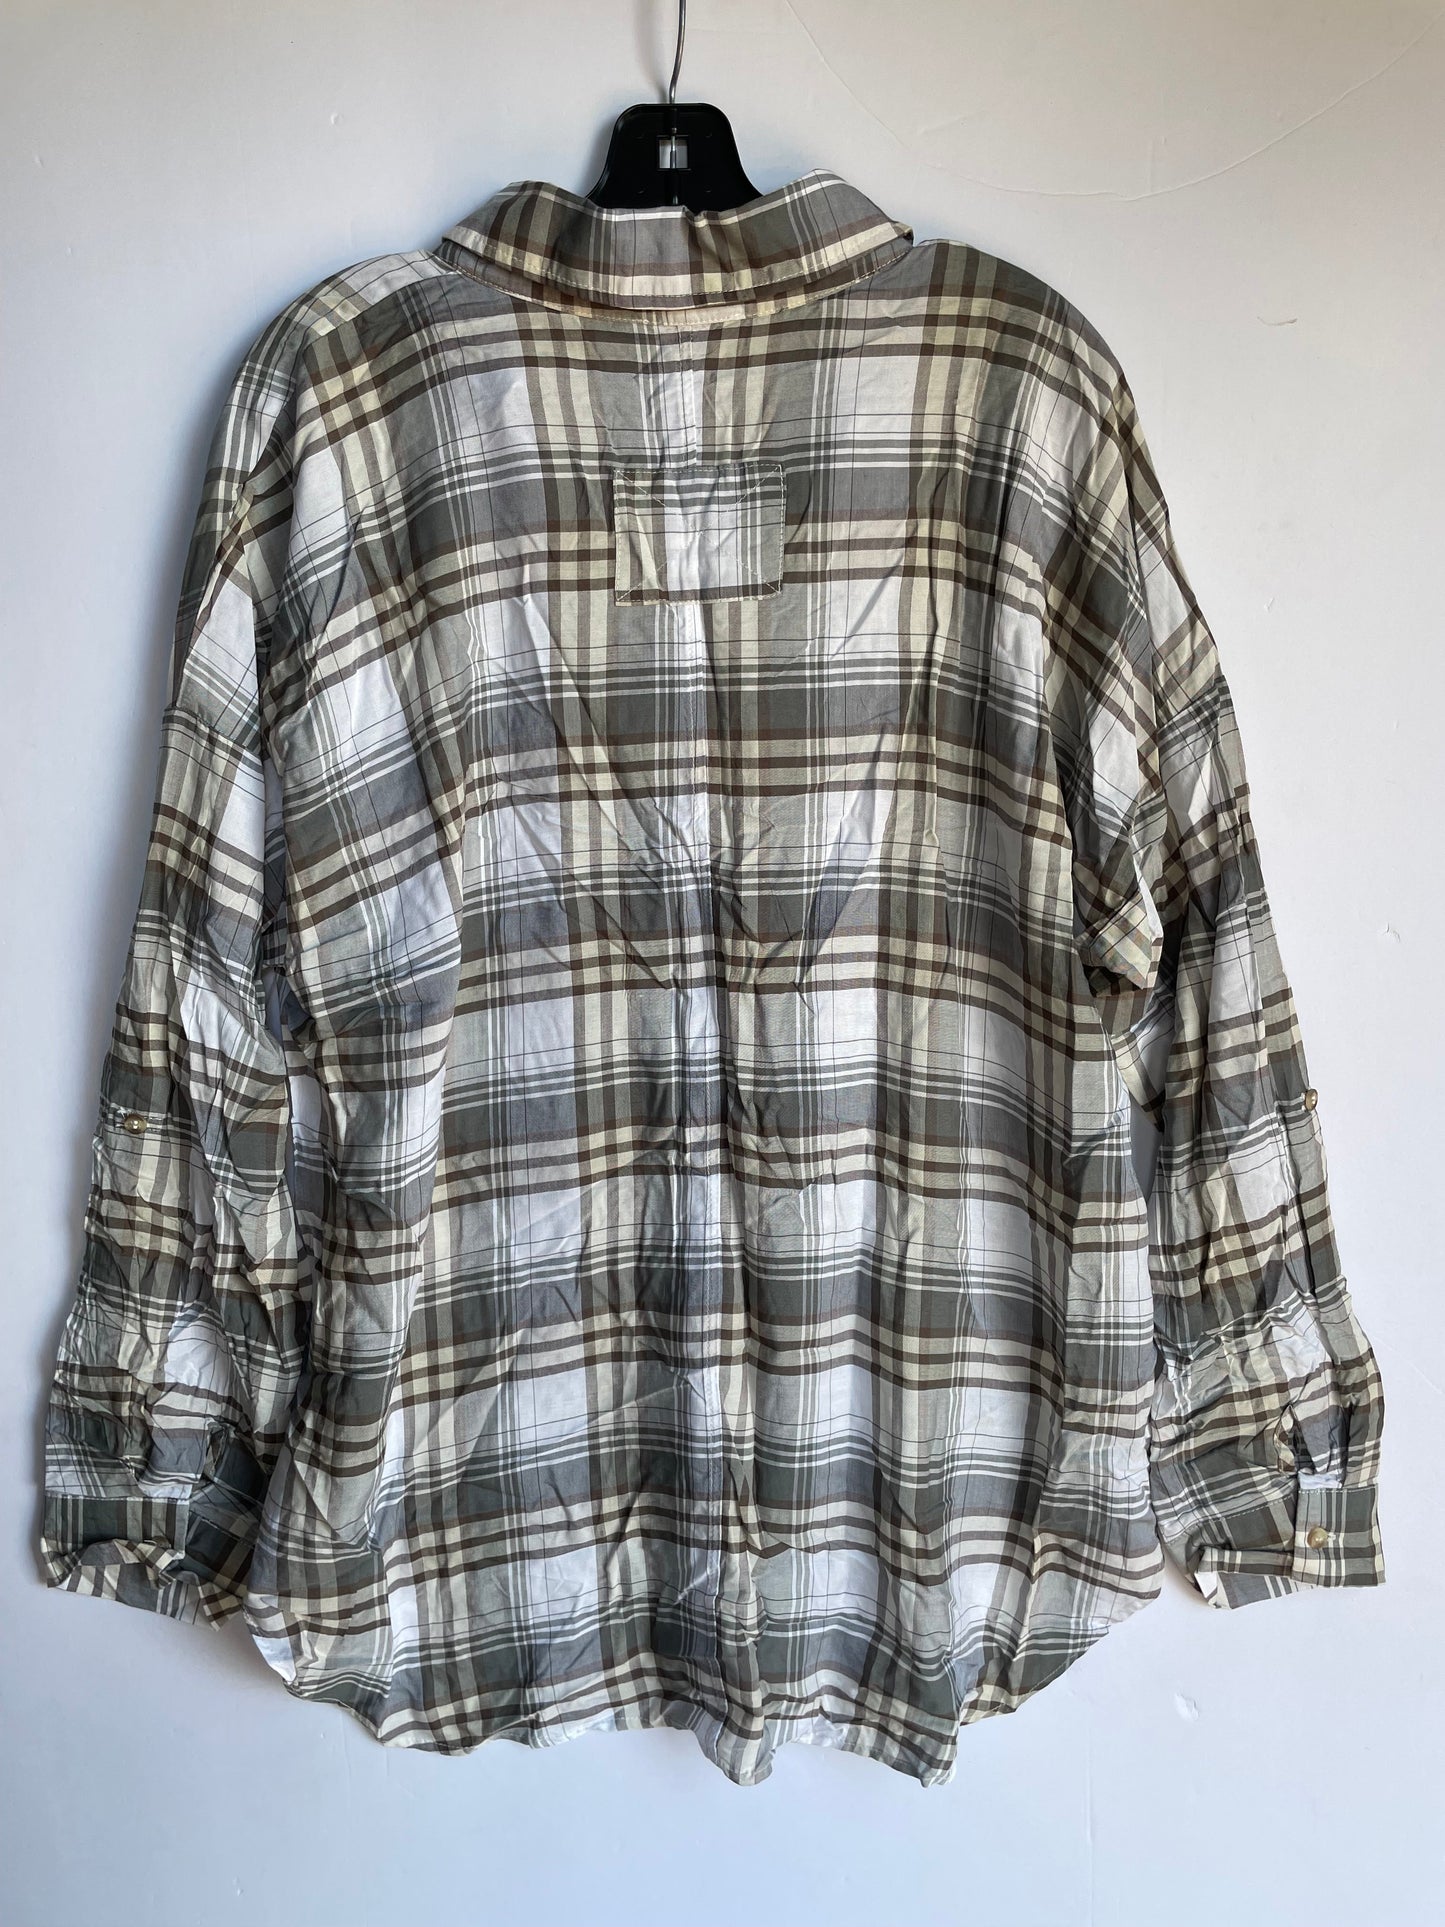 Plaid Pattern Top Long Sleeve Cme, Size 1x